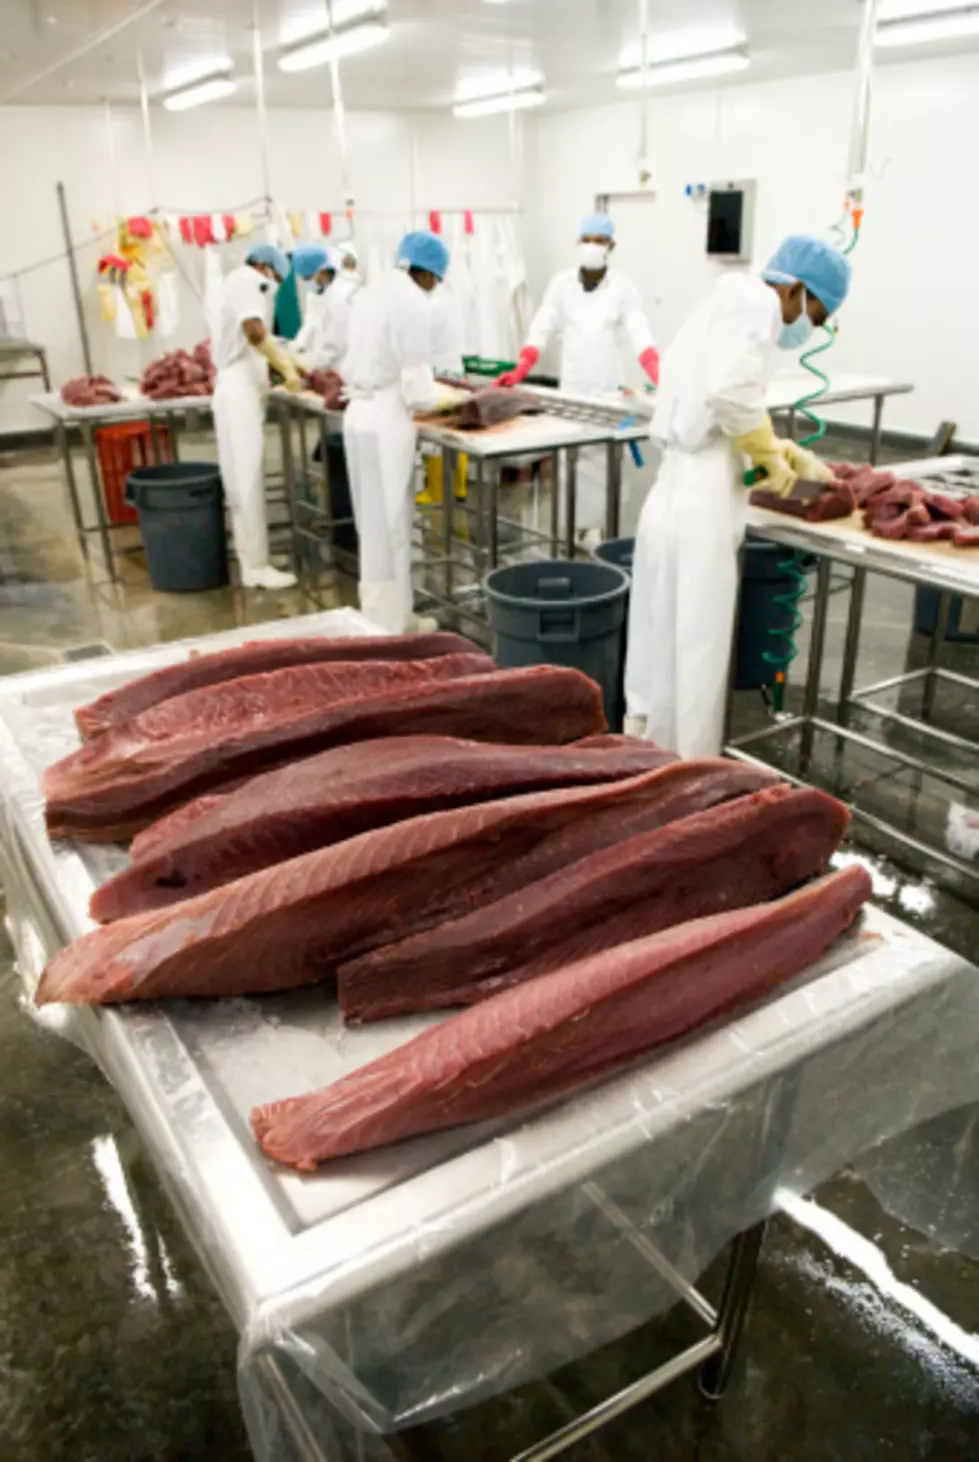 Tuna Linked to Salmonella Outbreak in 20 States